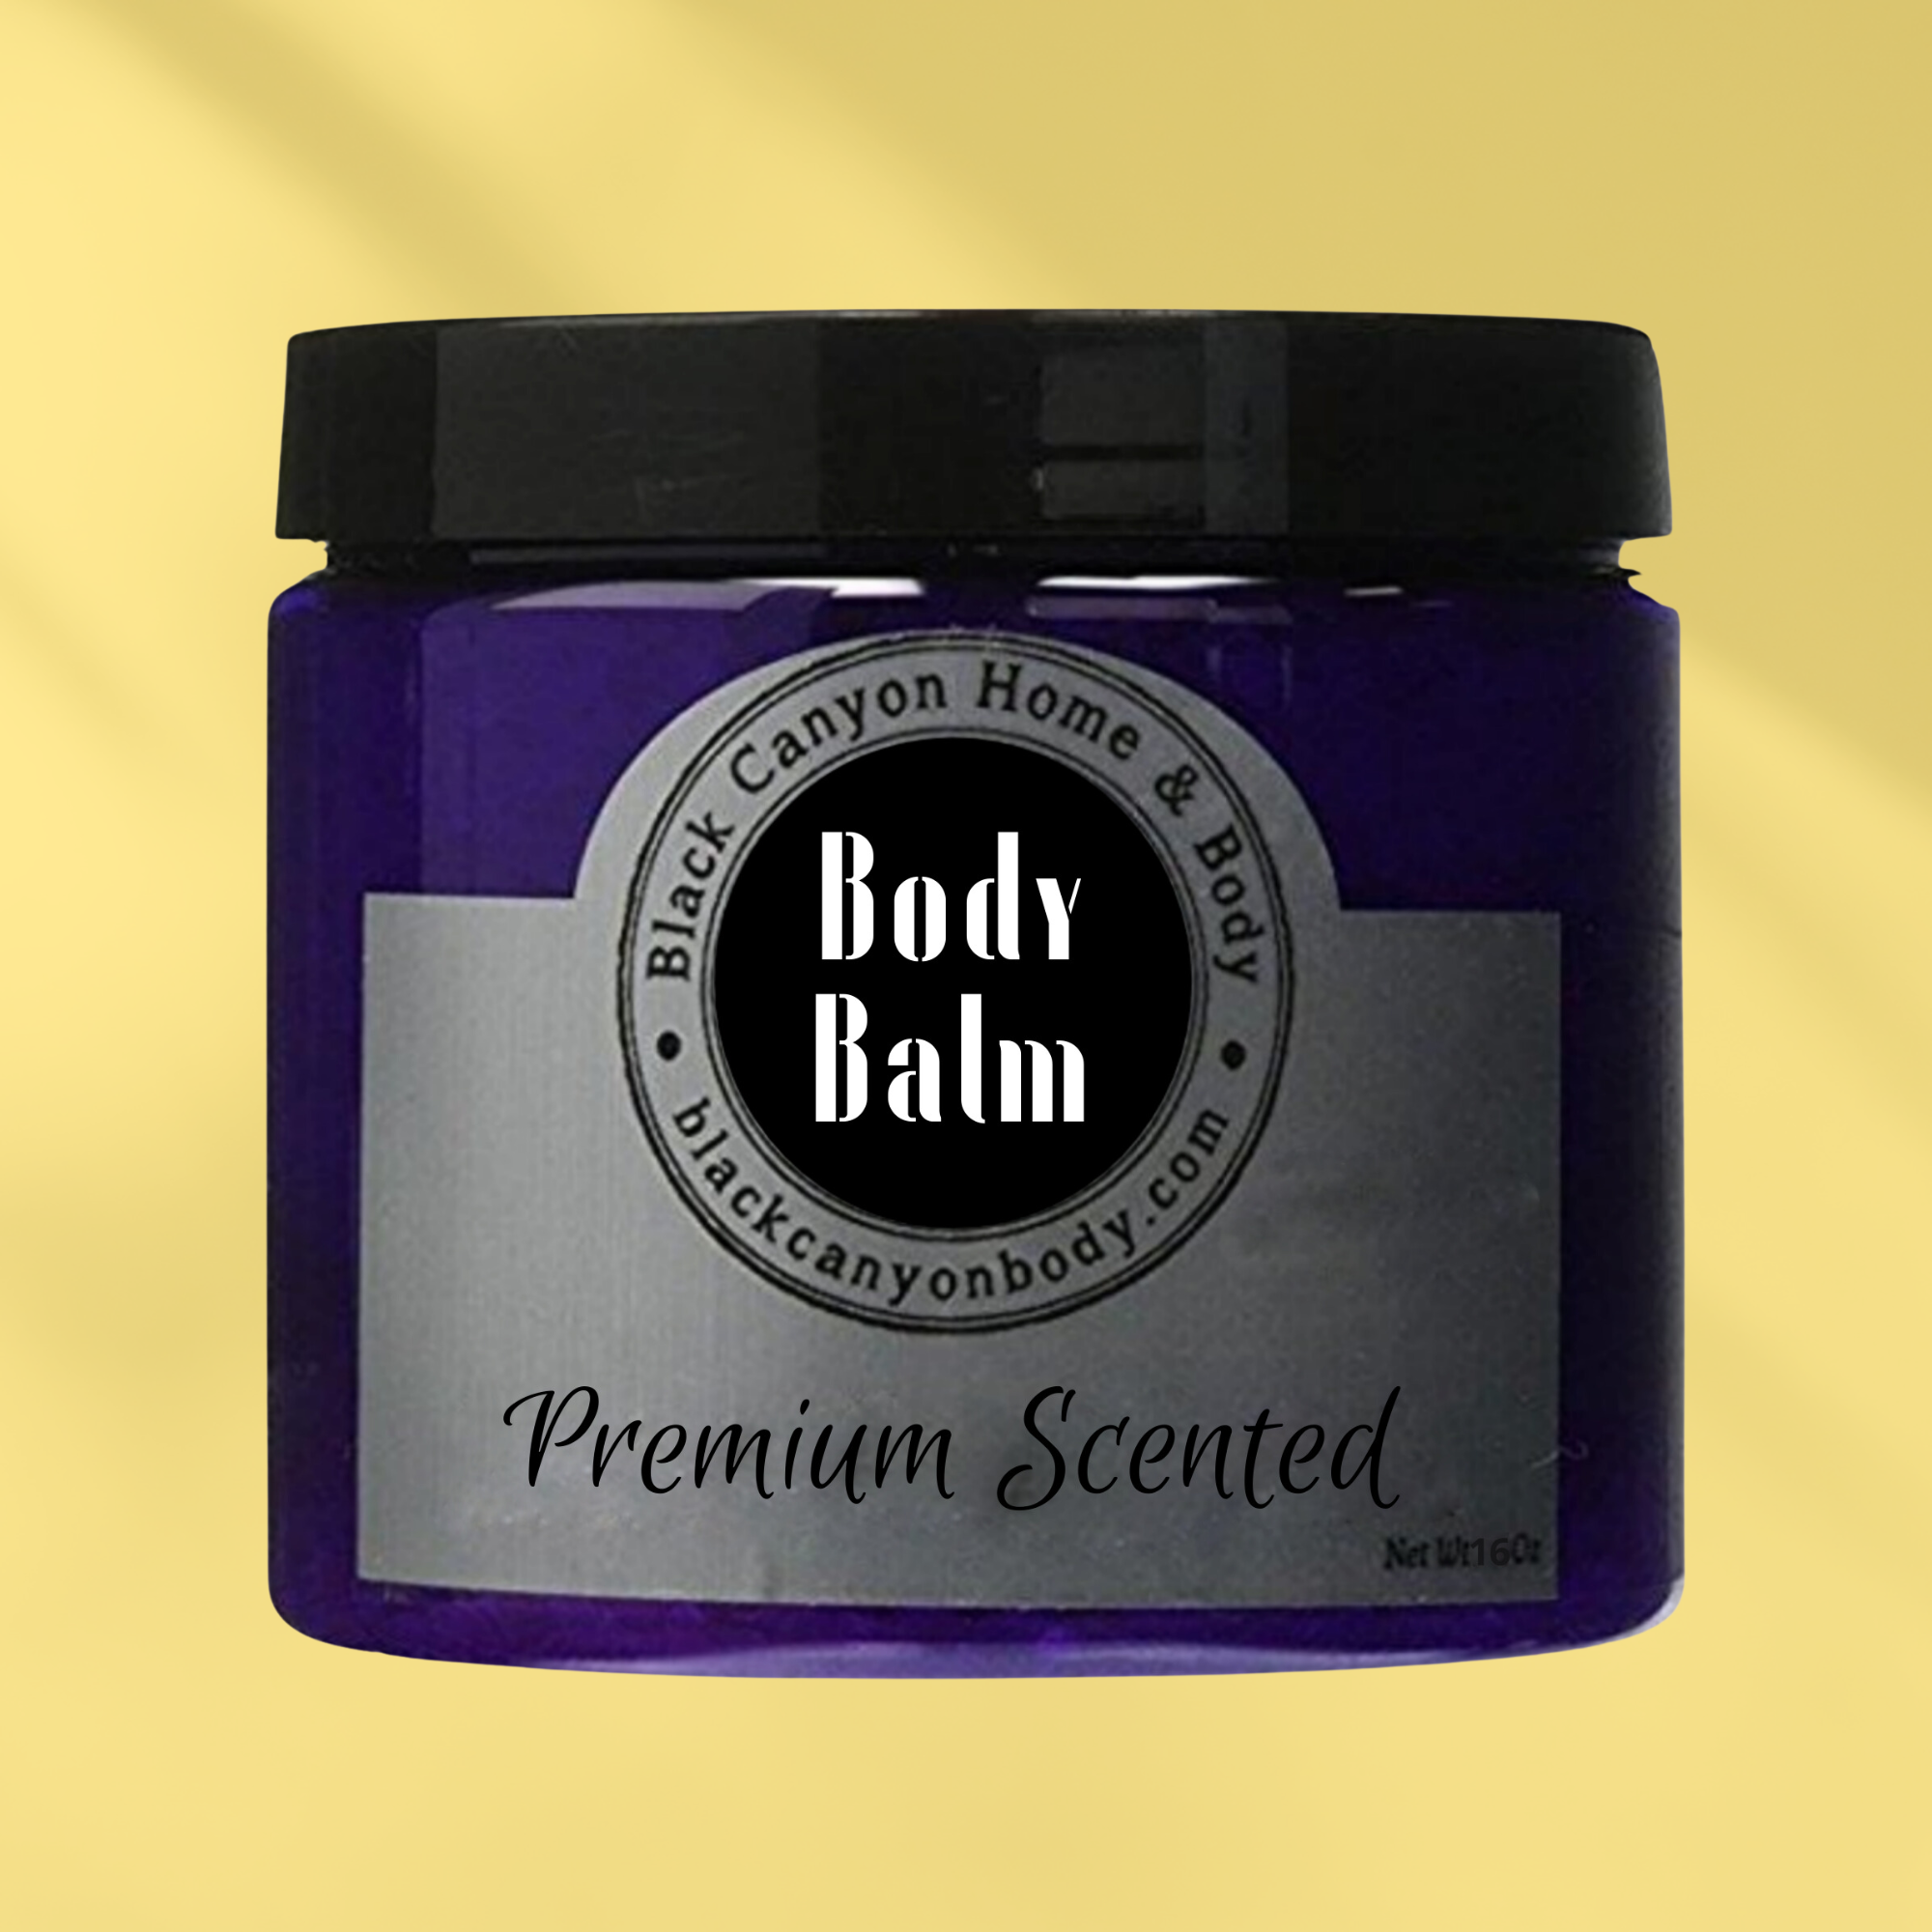 Paydens Cobalt Amber & Coriander Scented Natural Body Balm with Shea For Men